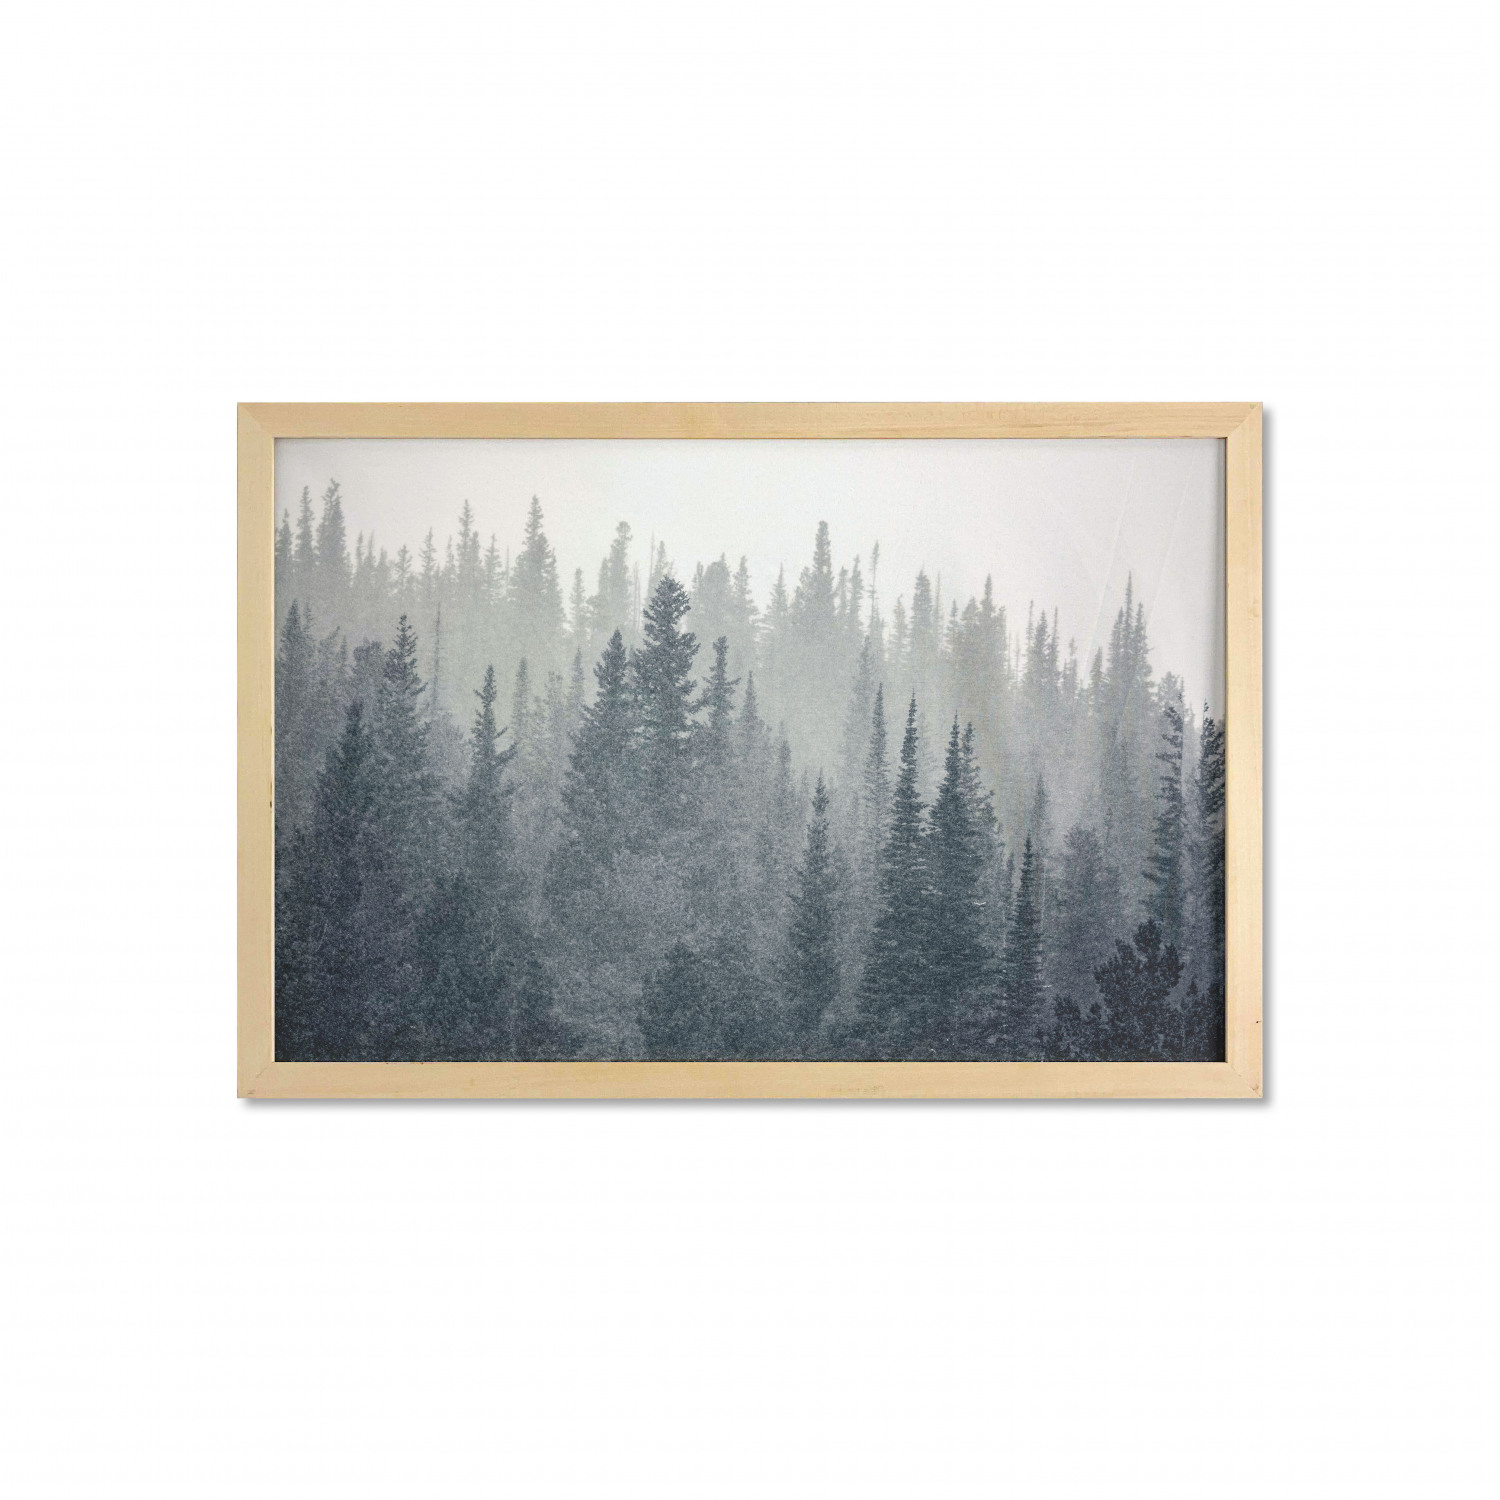 Dark Forest Wall Art with Frame, Gloomy Foggy Scene of Tall Pine Trees in National Park Colorado USA, Printed Fabric Poster for Bathroom Living Room, 35" x 23", Dark Slate Blue Dust, by Ambesonne - image 1 of 2